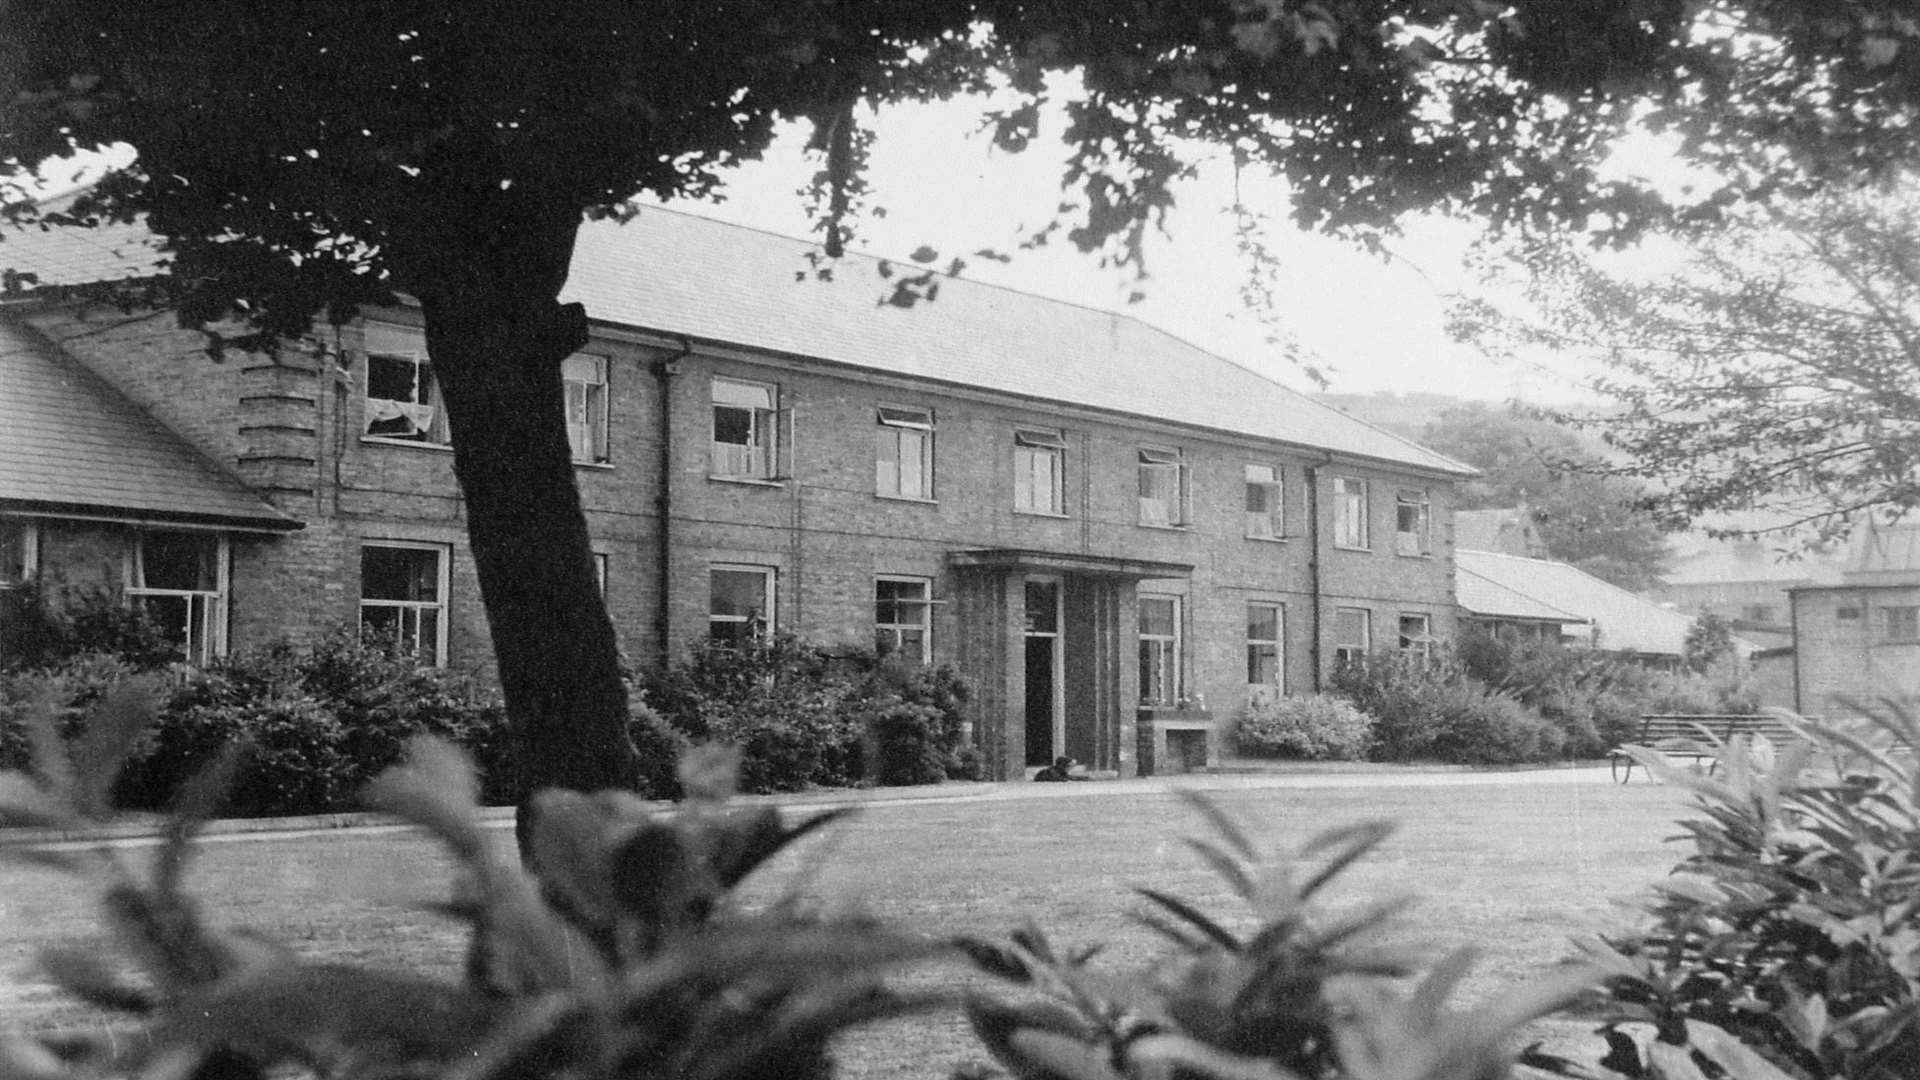 Buckland in 1950. Image courtesy of Dover Library